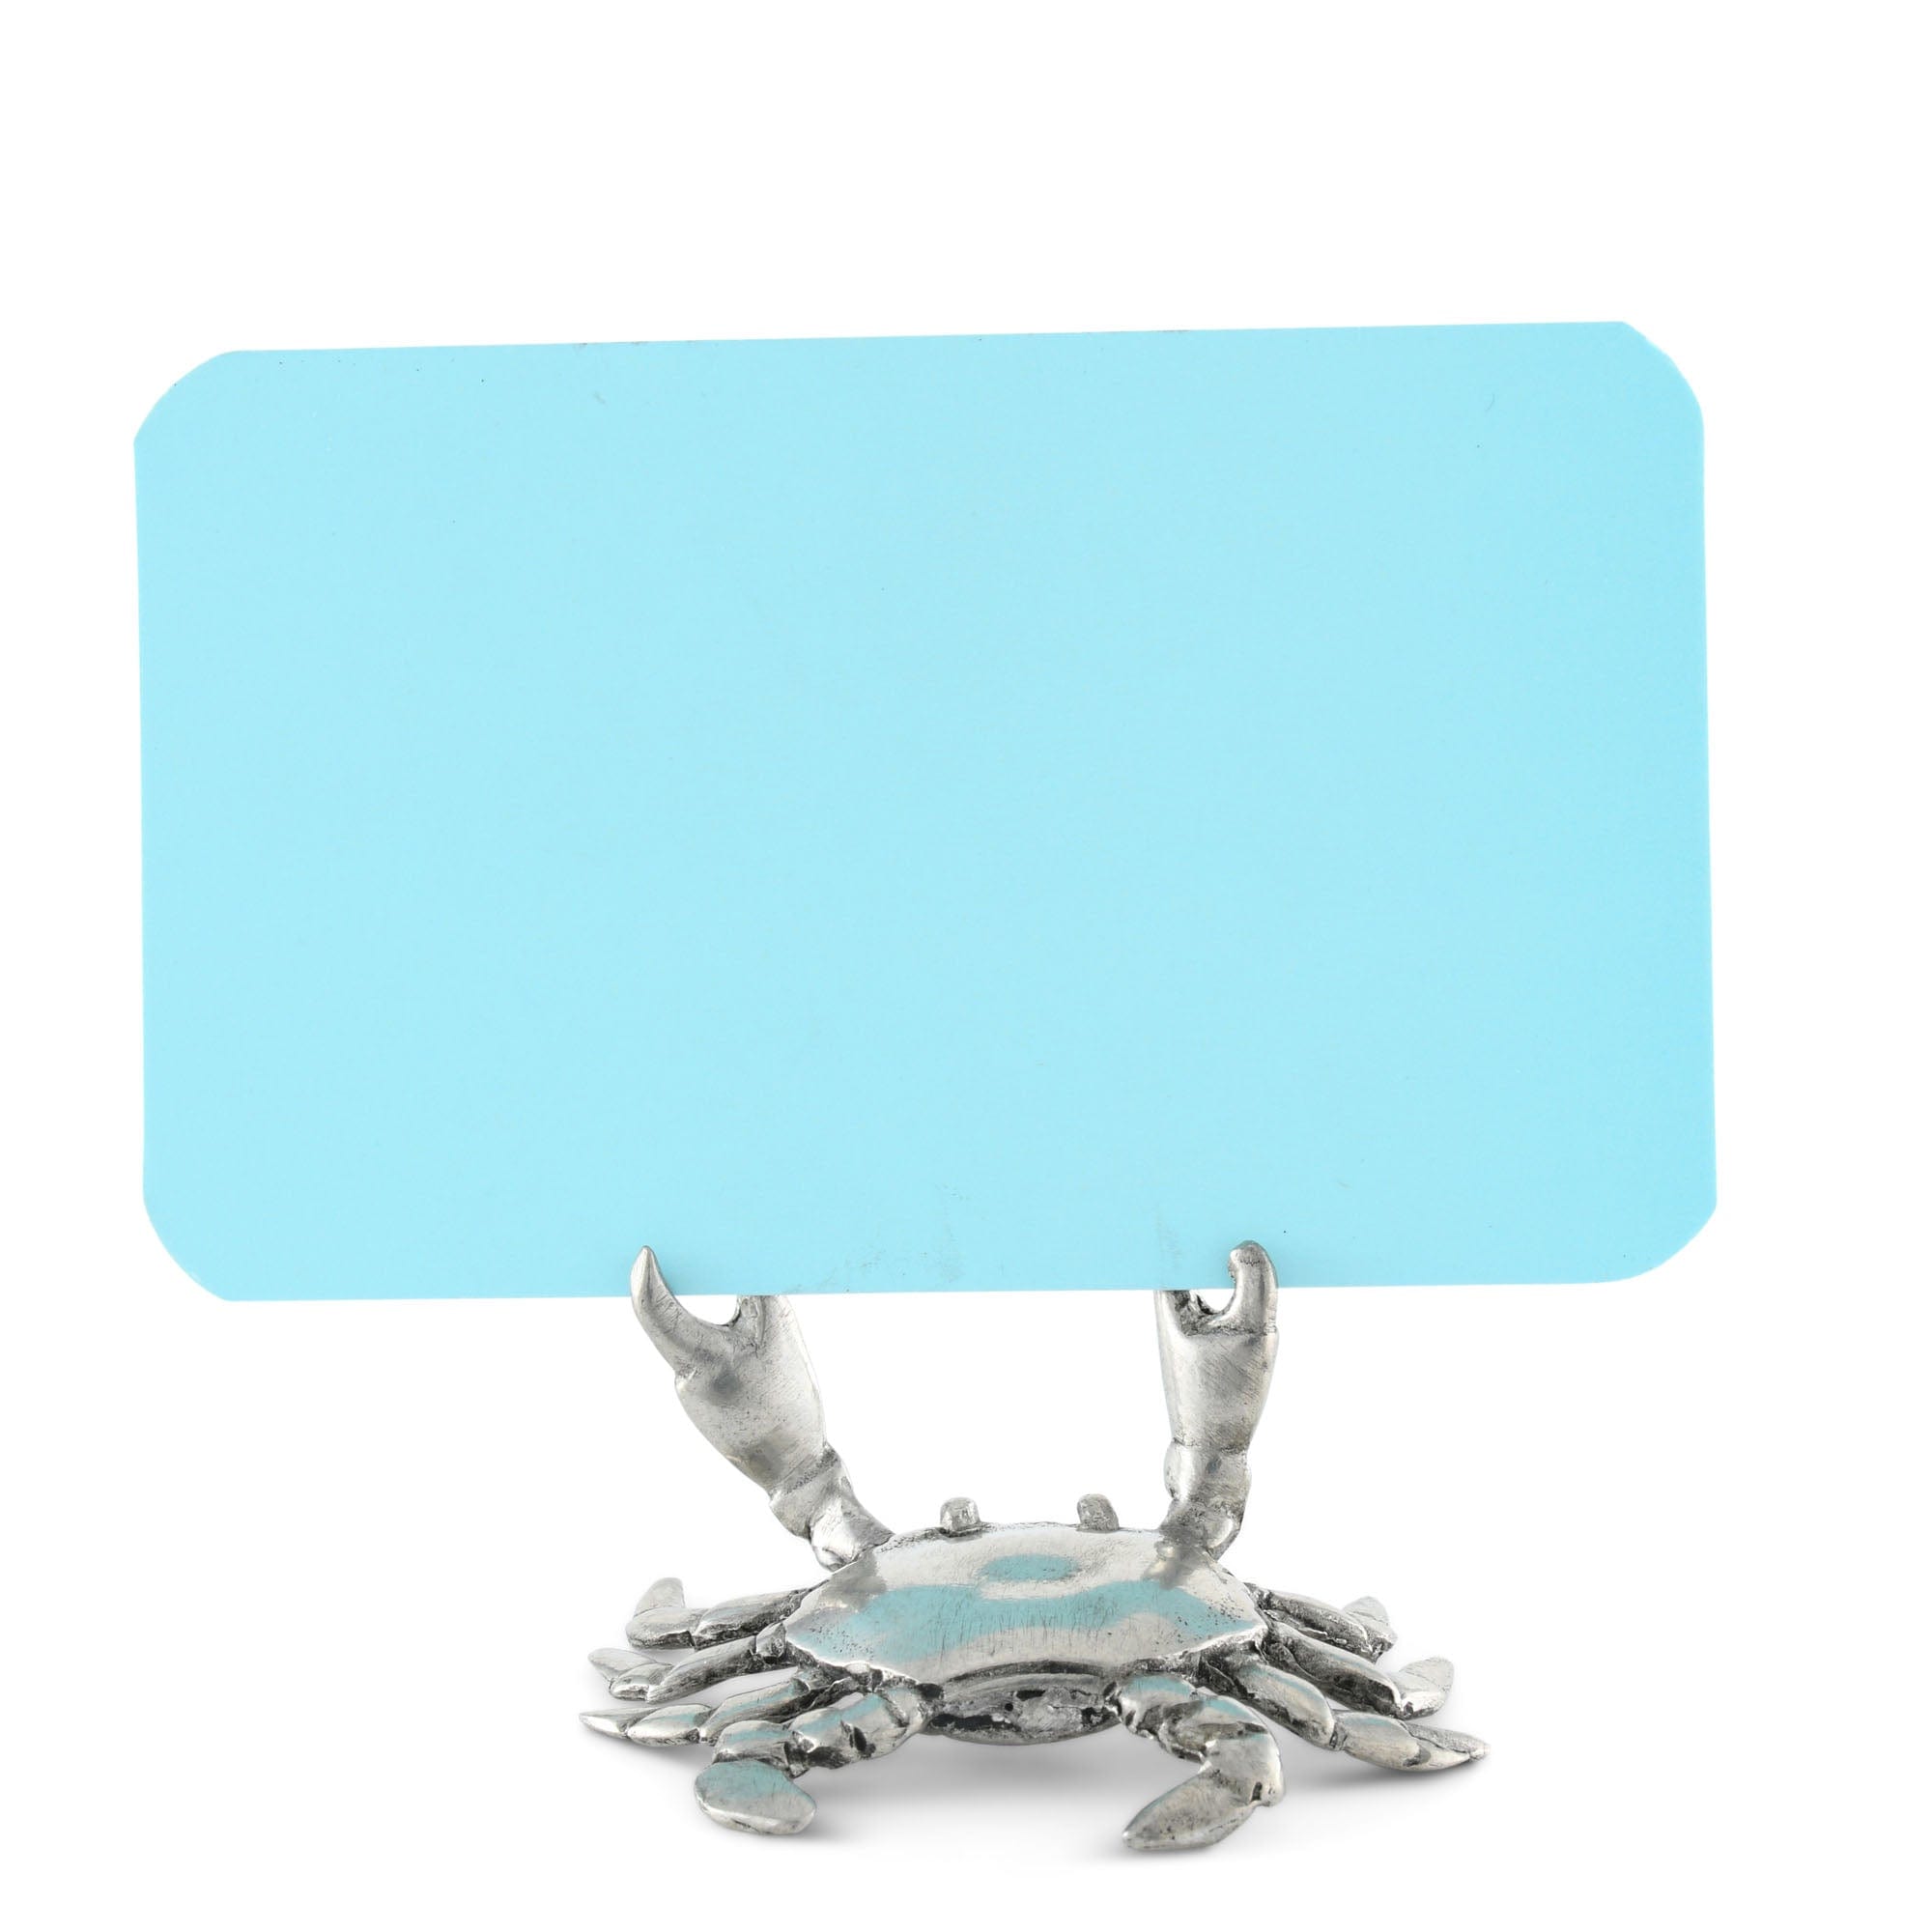 Vagabond House Sea and Shore Pewter Crab Place Card Holder